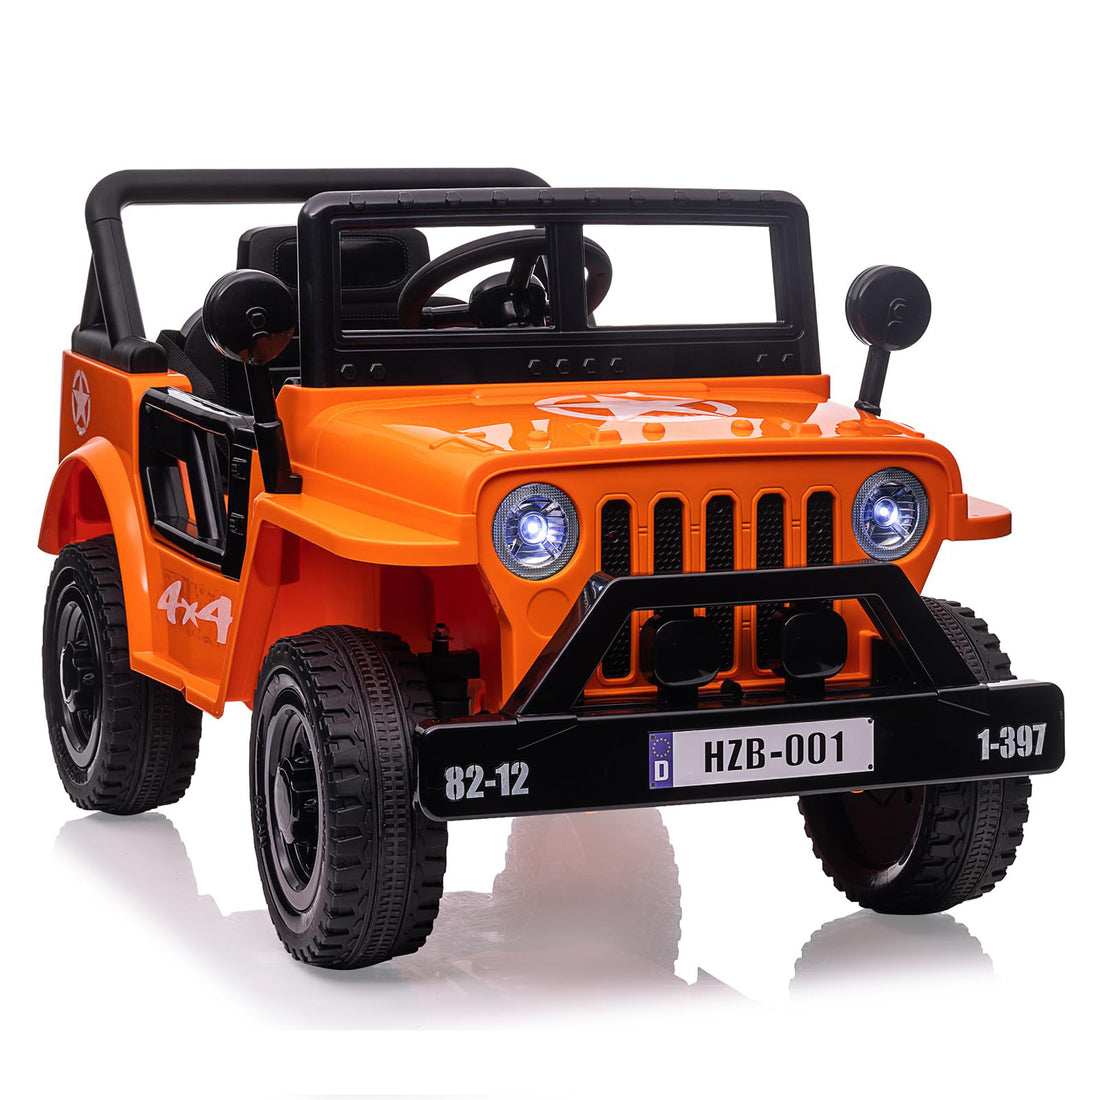 12V Kids Ride On Truck Car, Electric Ride On Car with Remote Control, Spring Suspension, Various Speeds, LED Lights, Music, and Safety Belt, Electric Ride On Toys for Kids 3+, Orange